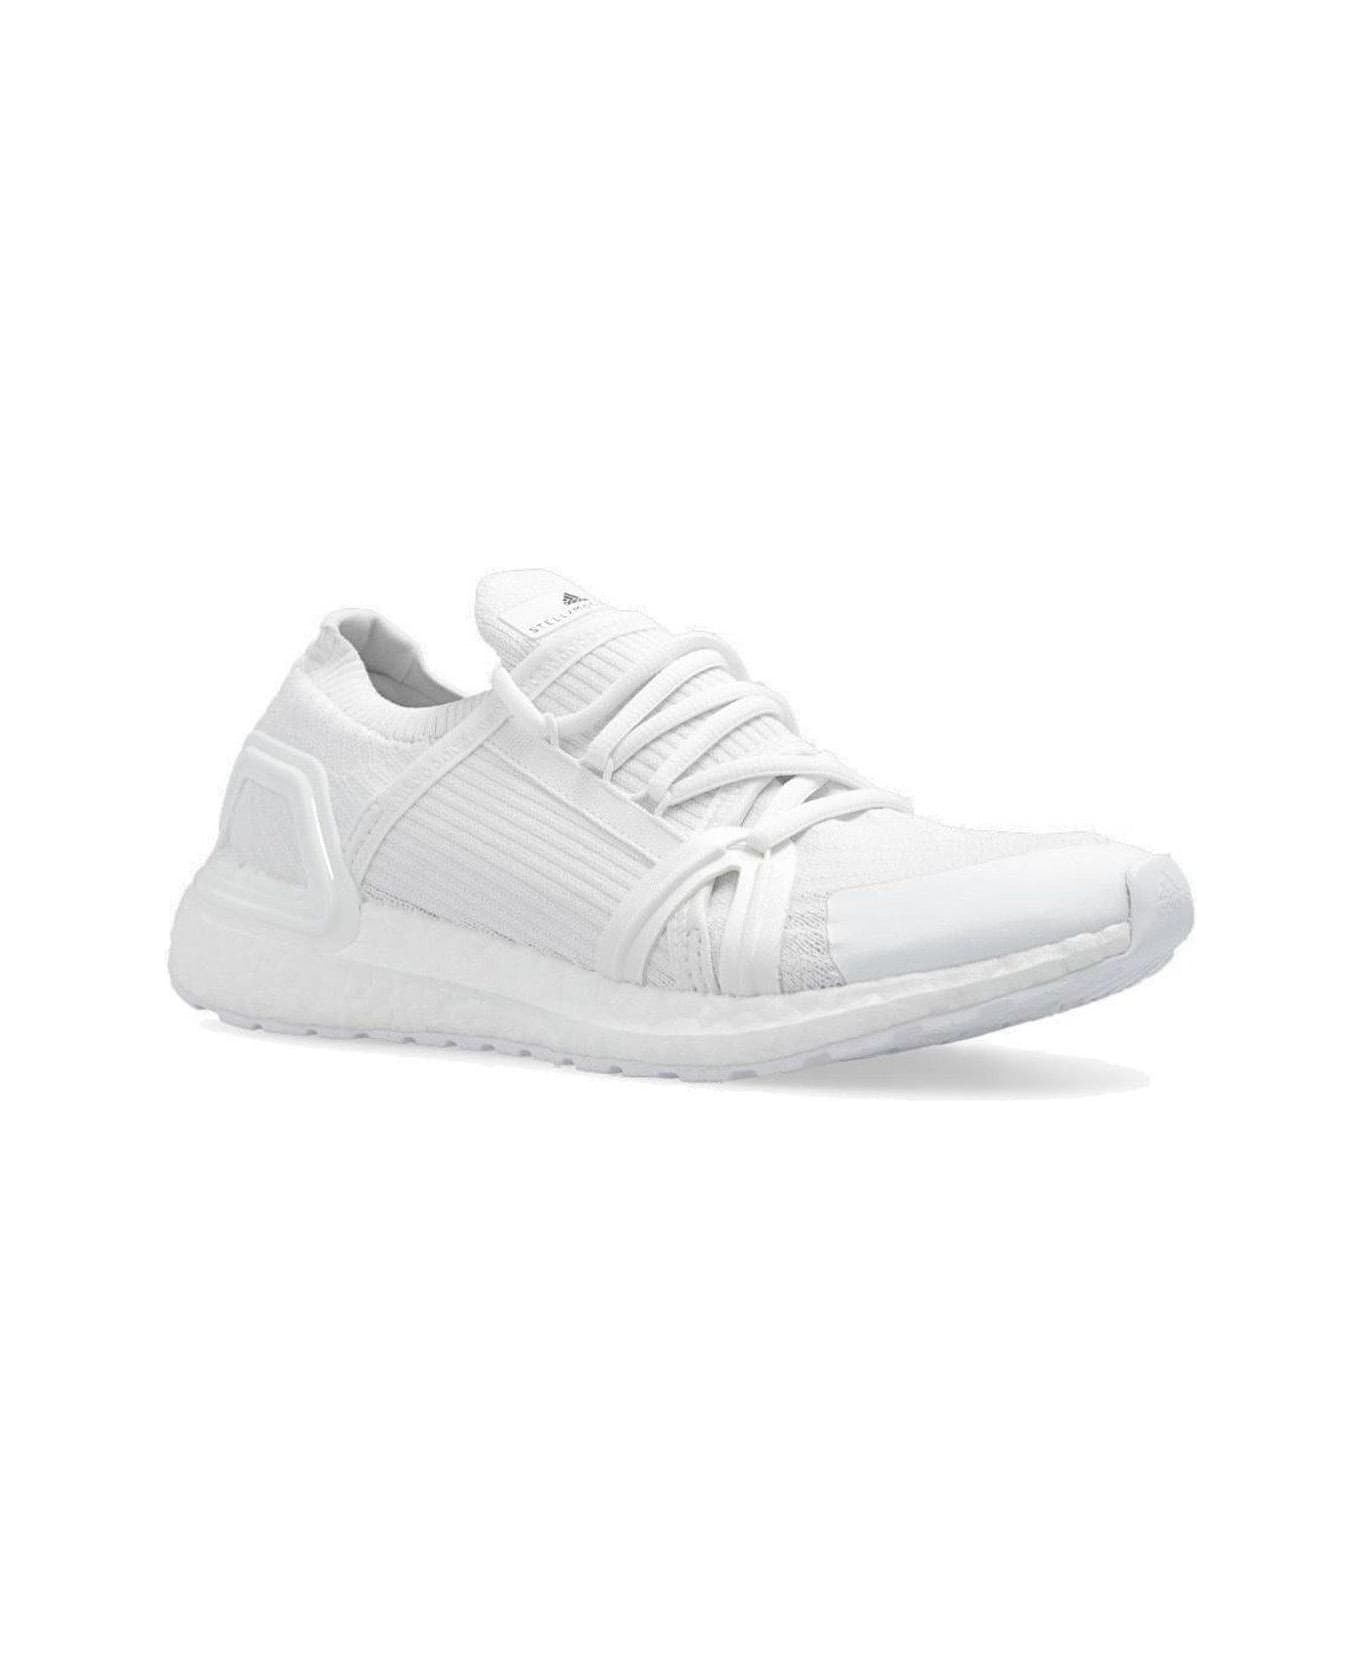 Adidas by Stella McCartney Ultraboost 20 Lace-up Sneakers - White